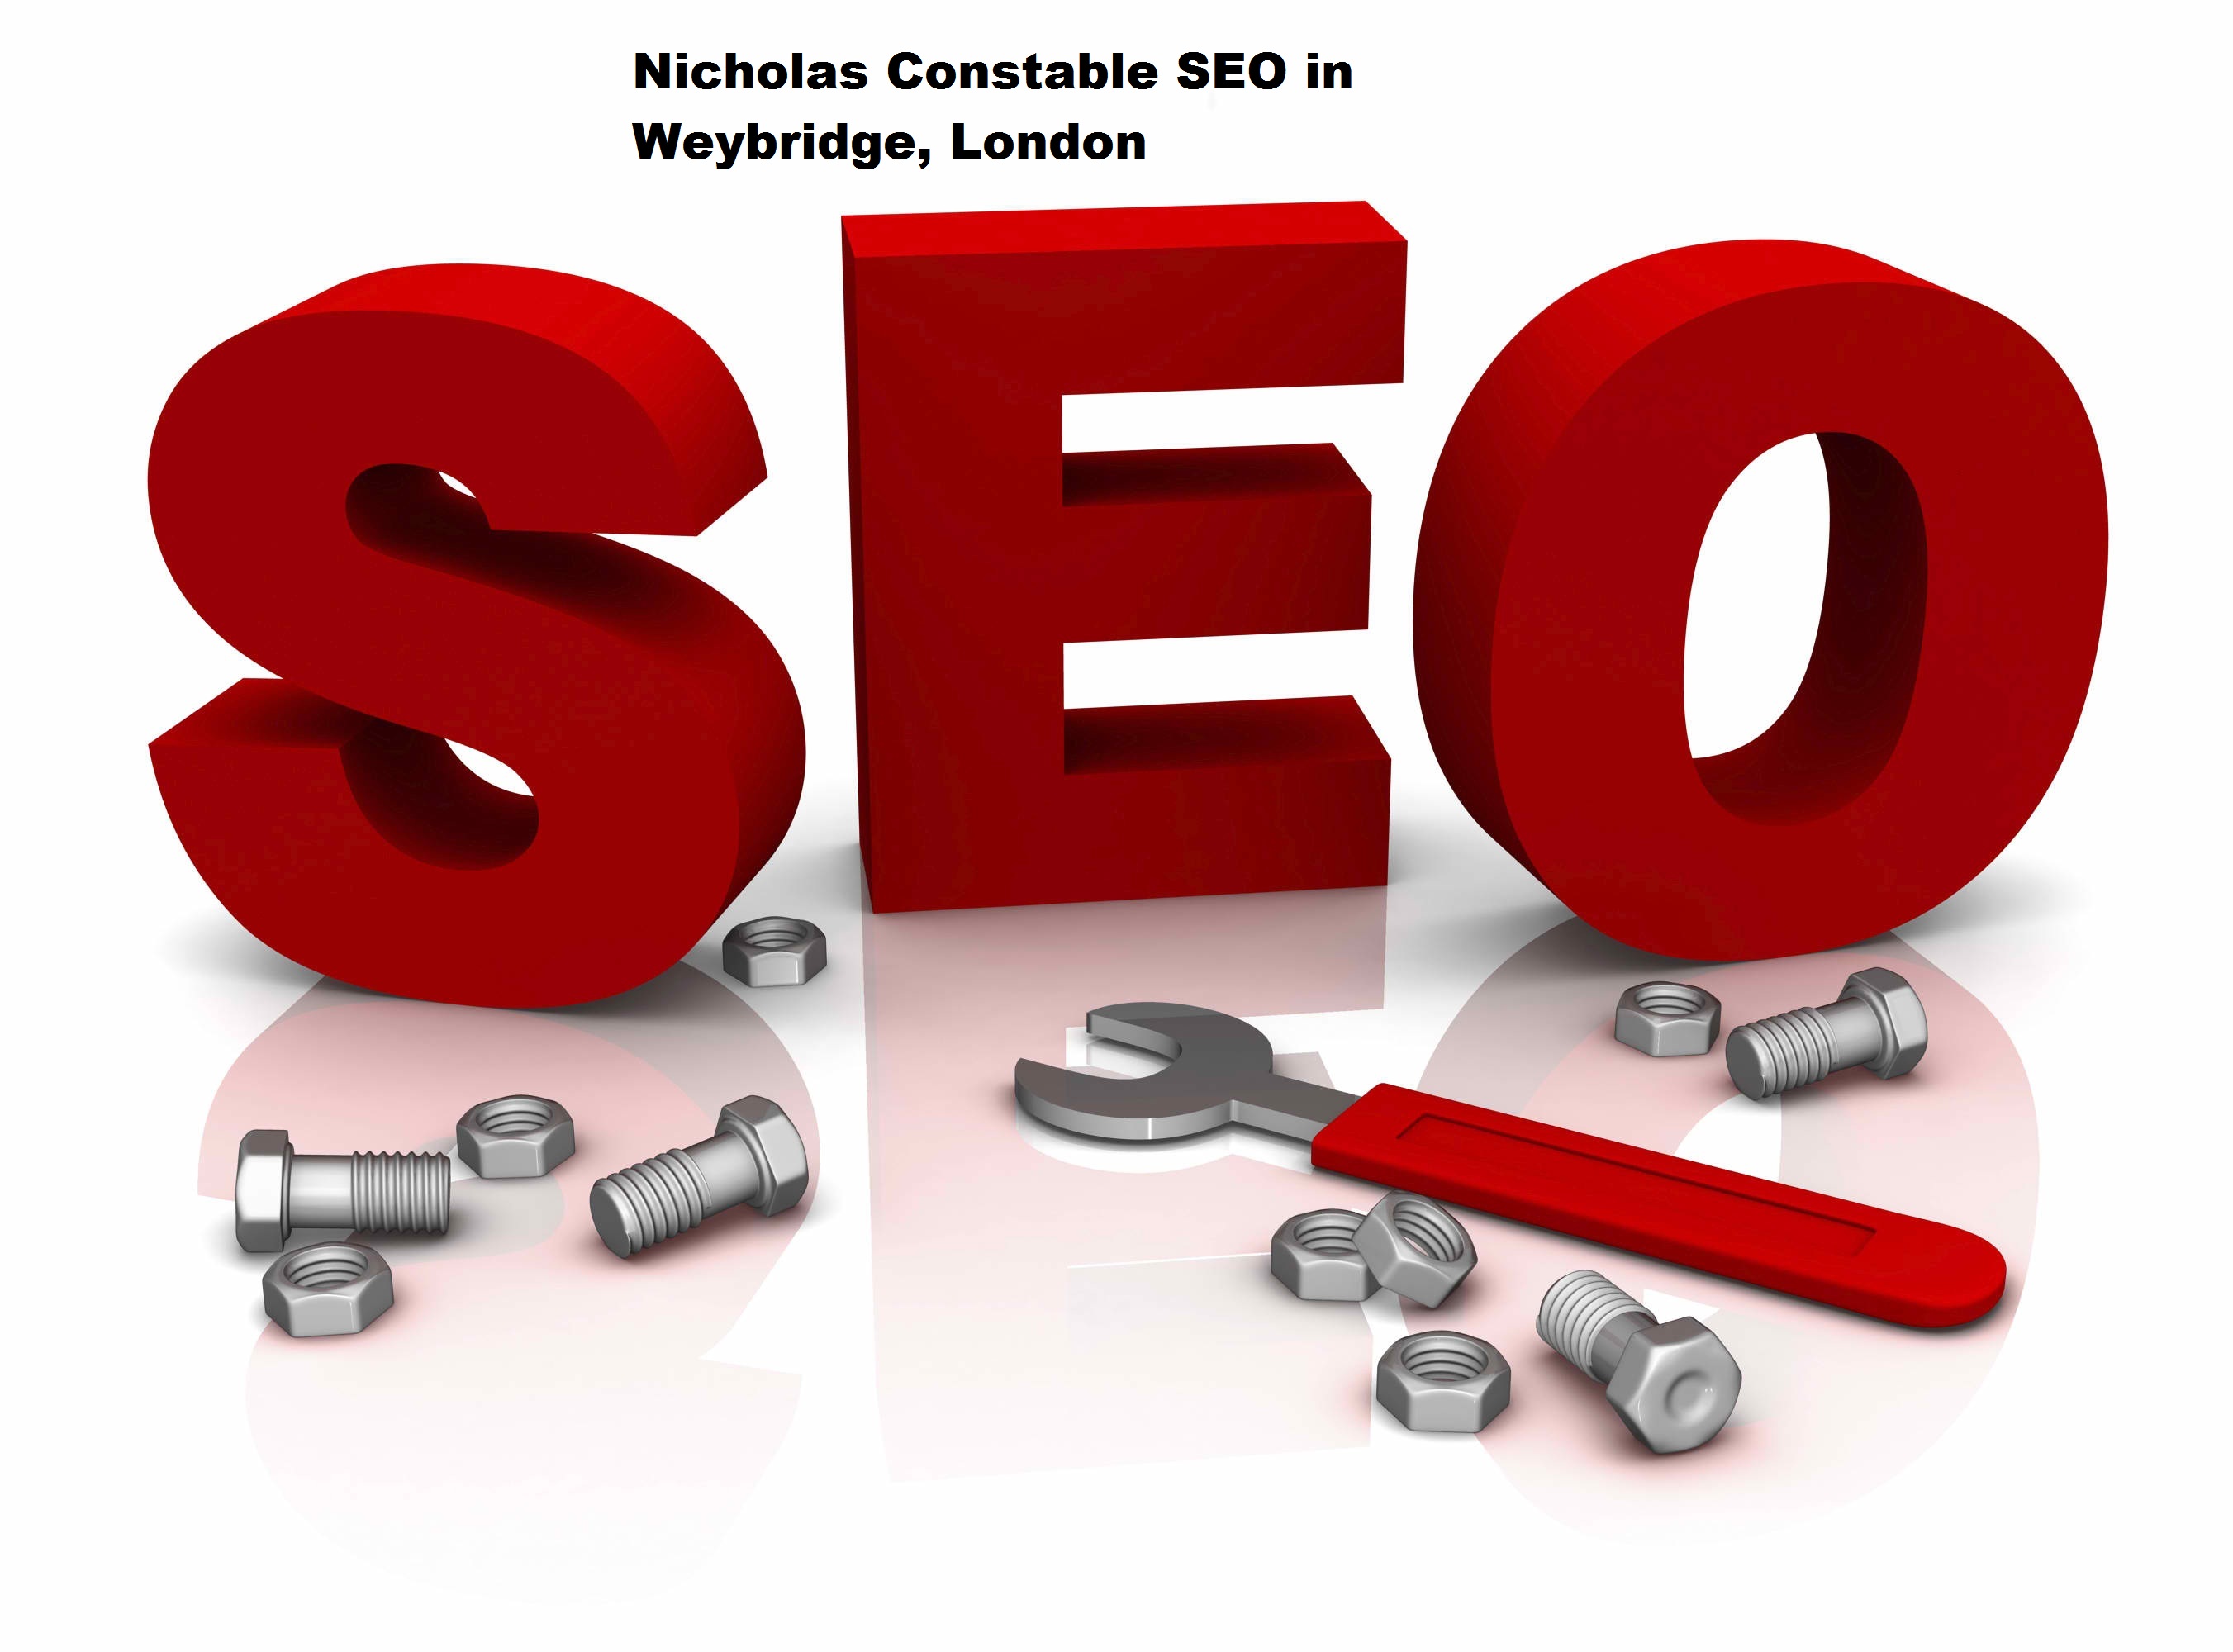 Nicholas Constable Talking about 5 KEY Benefits of SEO for Small Business